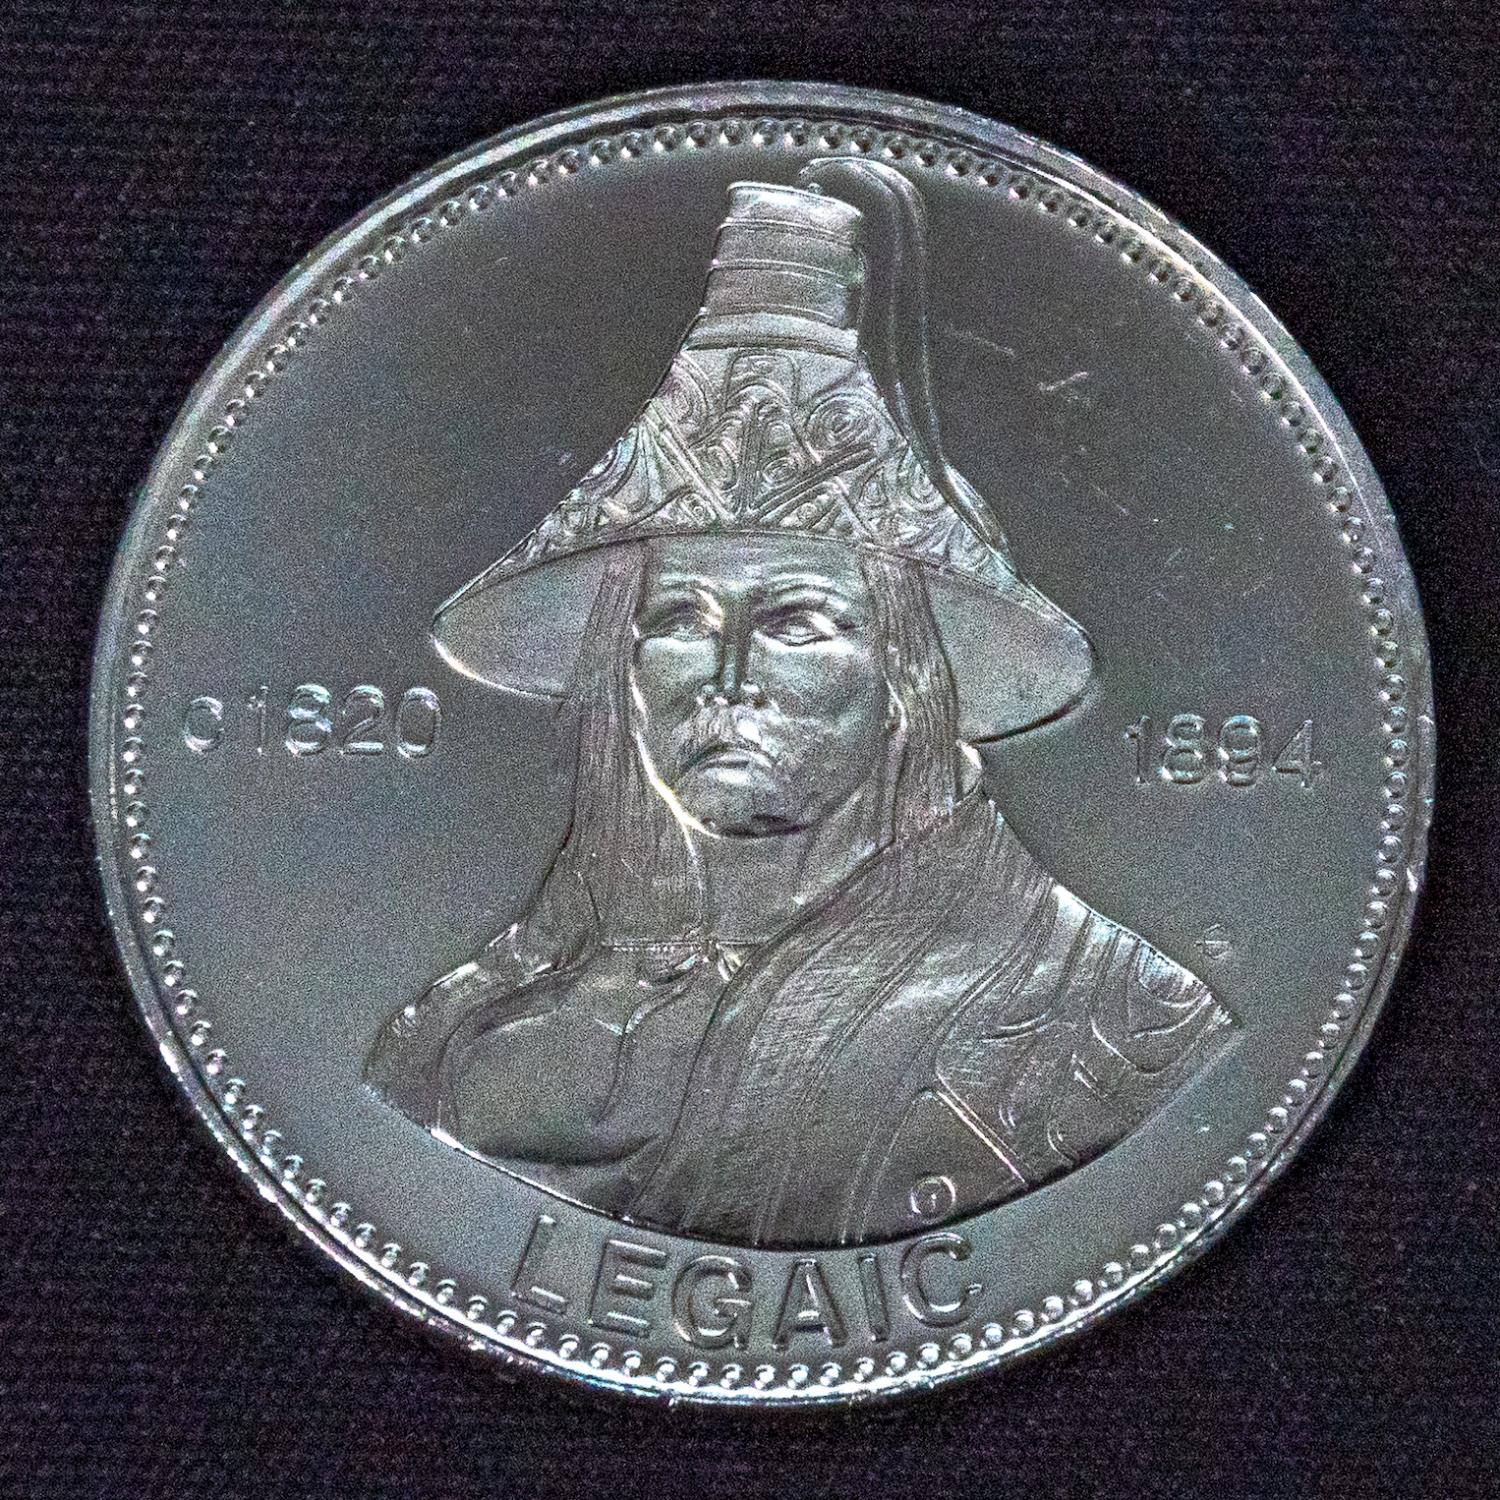 A coin with Chief Legaic engraved on the front. On it says c 1820 1894, LEGAIC